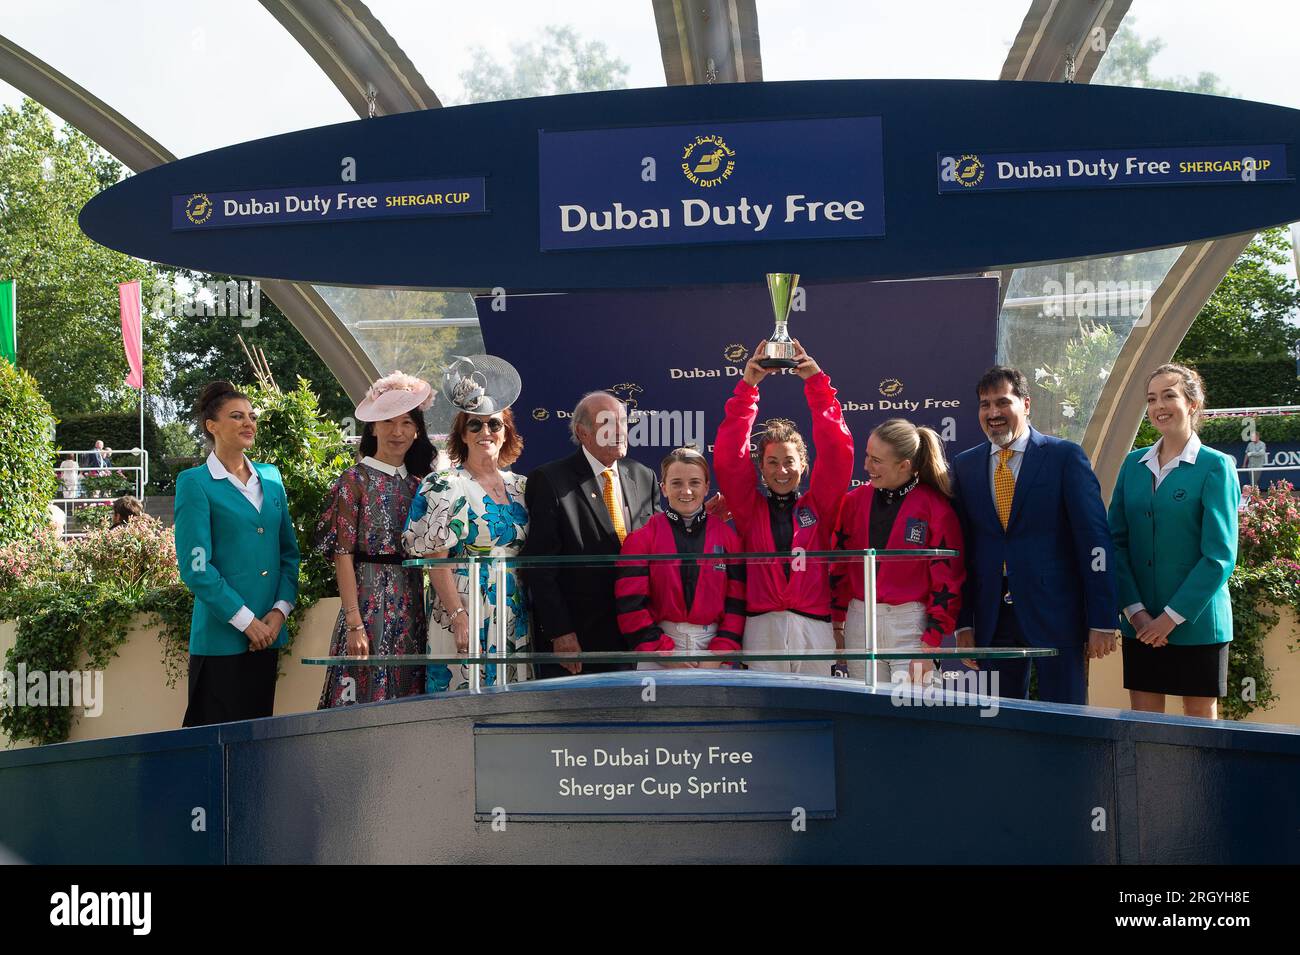 Ascot, Berkshire, UK. 12th August, 2023. The Ladies Team of Hayley Turner (Captain), Hollie Doyle and Saffie Osborne won the overall team at the Dubai Duty Free Shergar Cup at Ascot Racecourse today. They celebrated with spraying champagne over each other. Credit: Maureen McLean/Alamy Live News Stock Photo